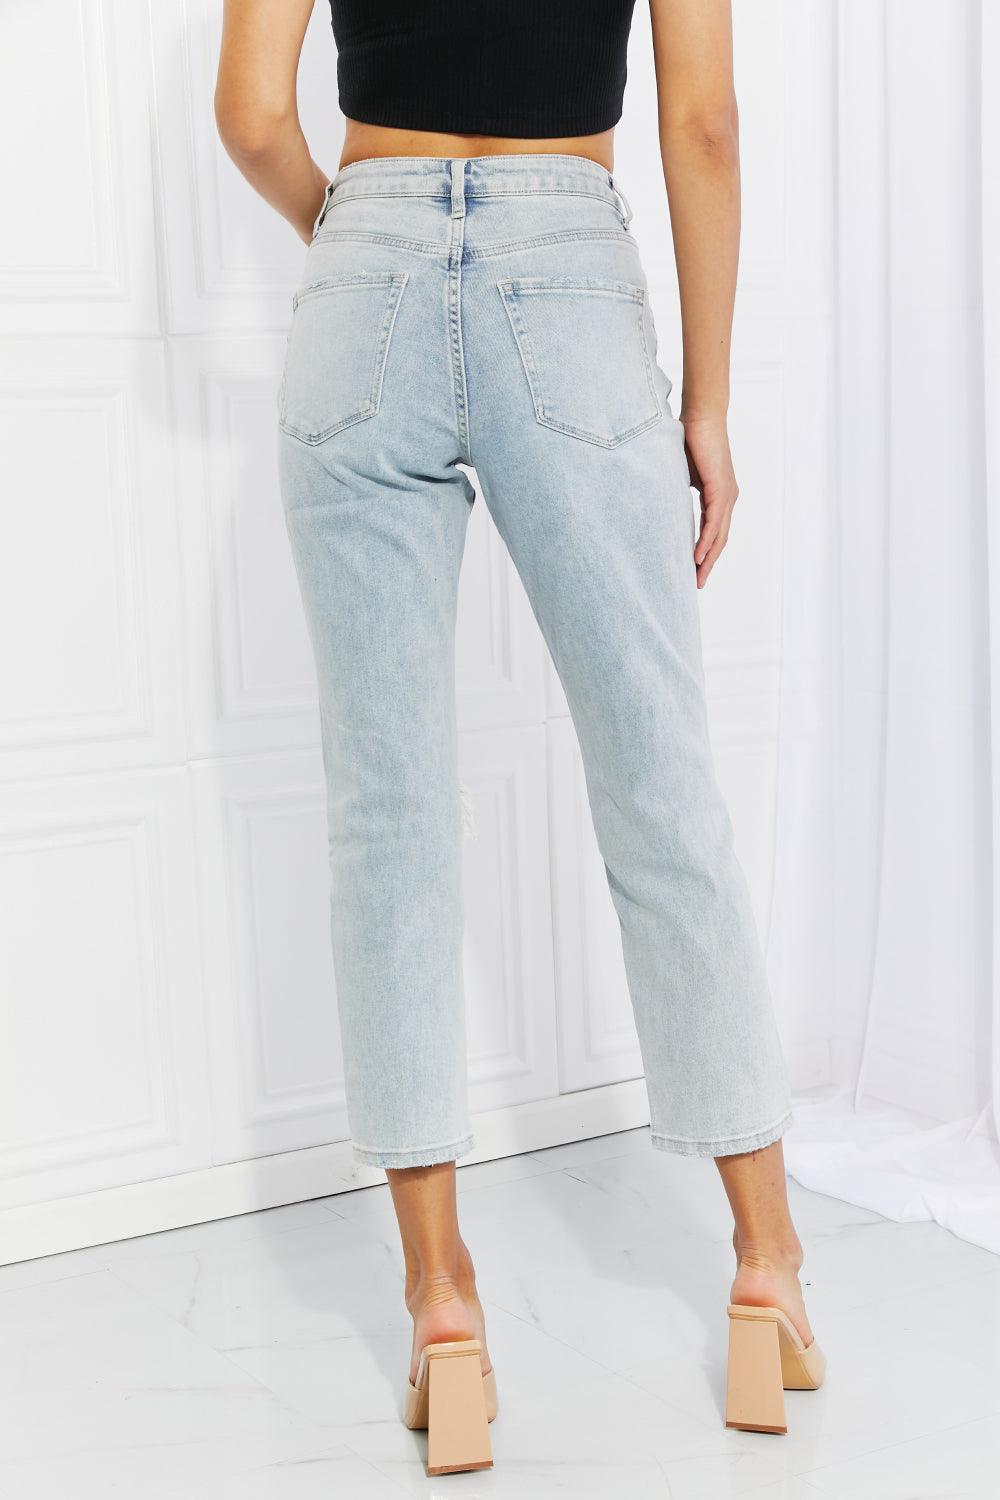 VERVET Stand Out Full Size Distressed Cropped Jeans - The Fiery Jasmine